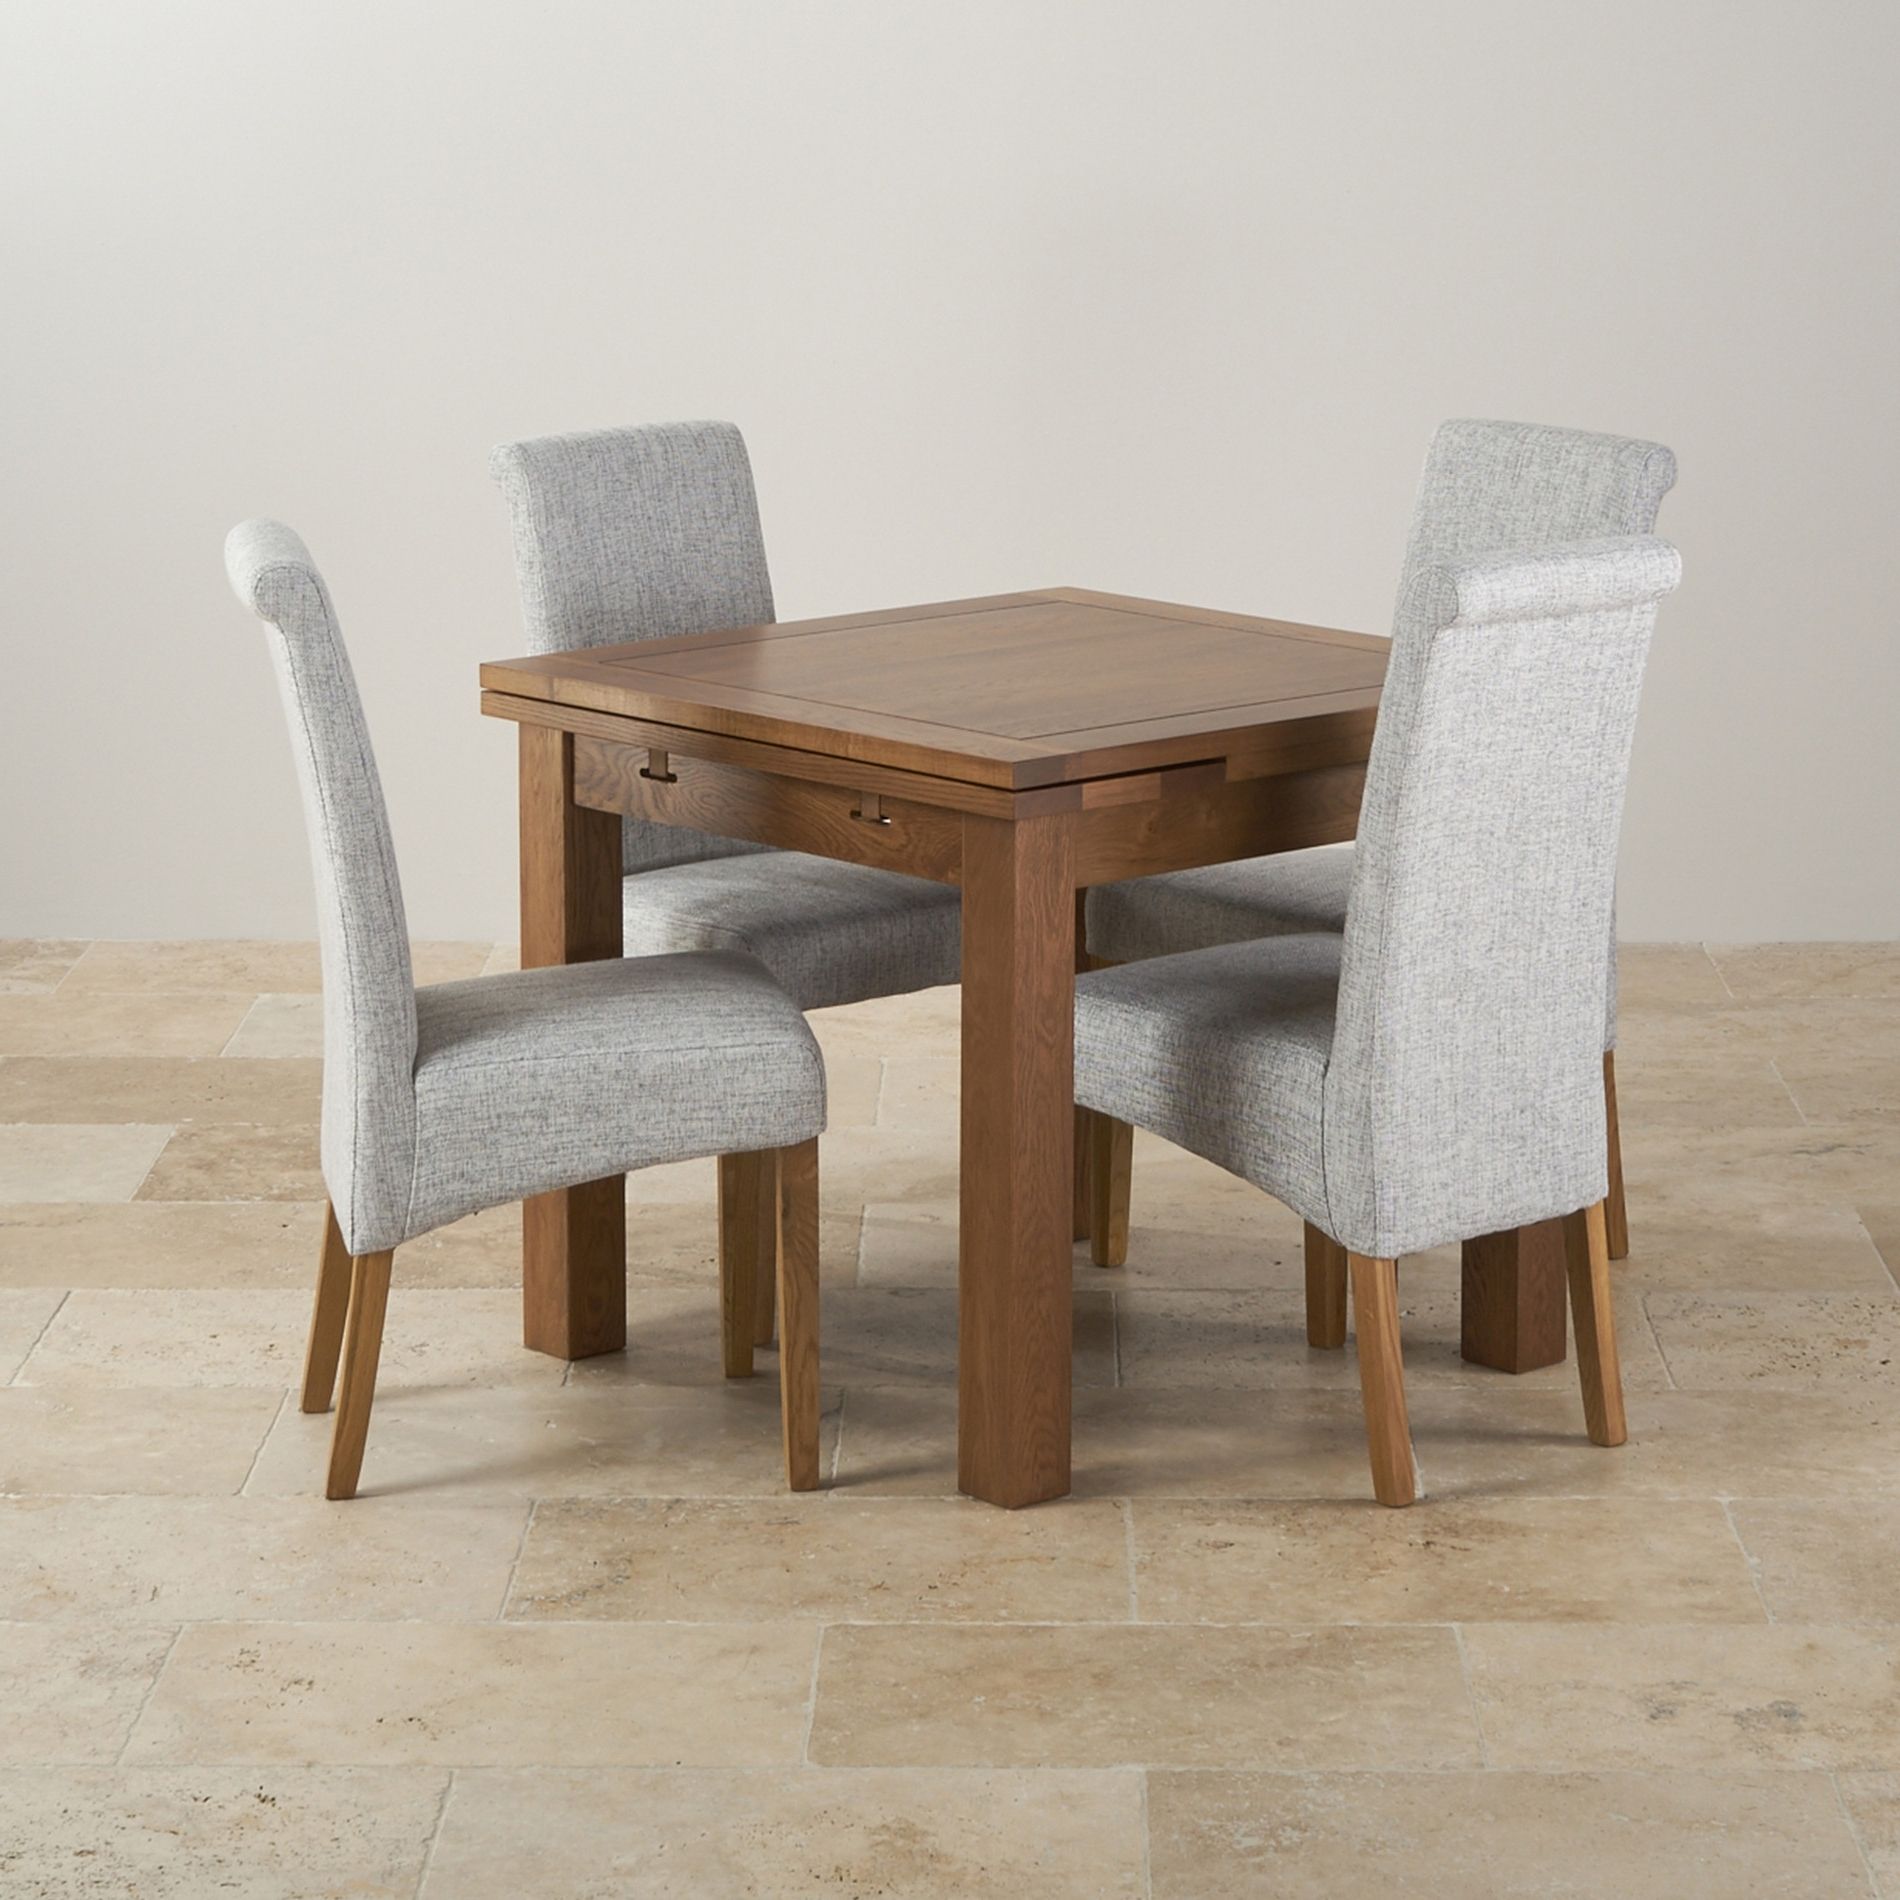 Well Liked Square Extendable Dining Tables And Chairs With Square Oak Dining Tabl Square Oak Dining Table For 4 2018 Round (View 18 of 25)